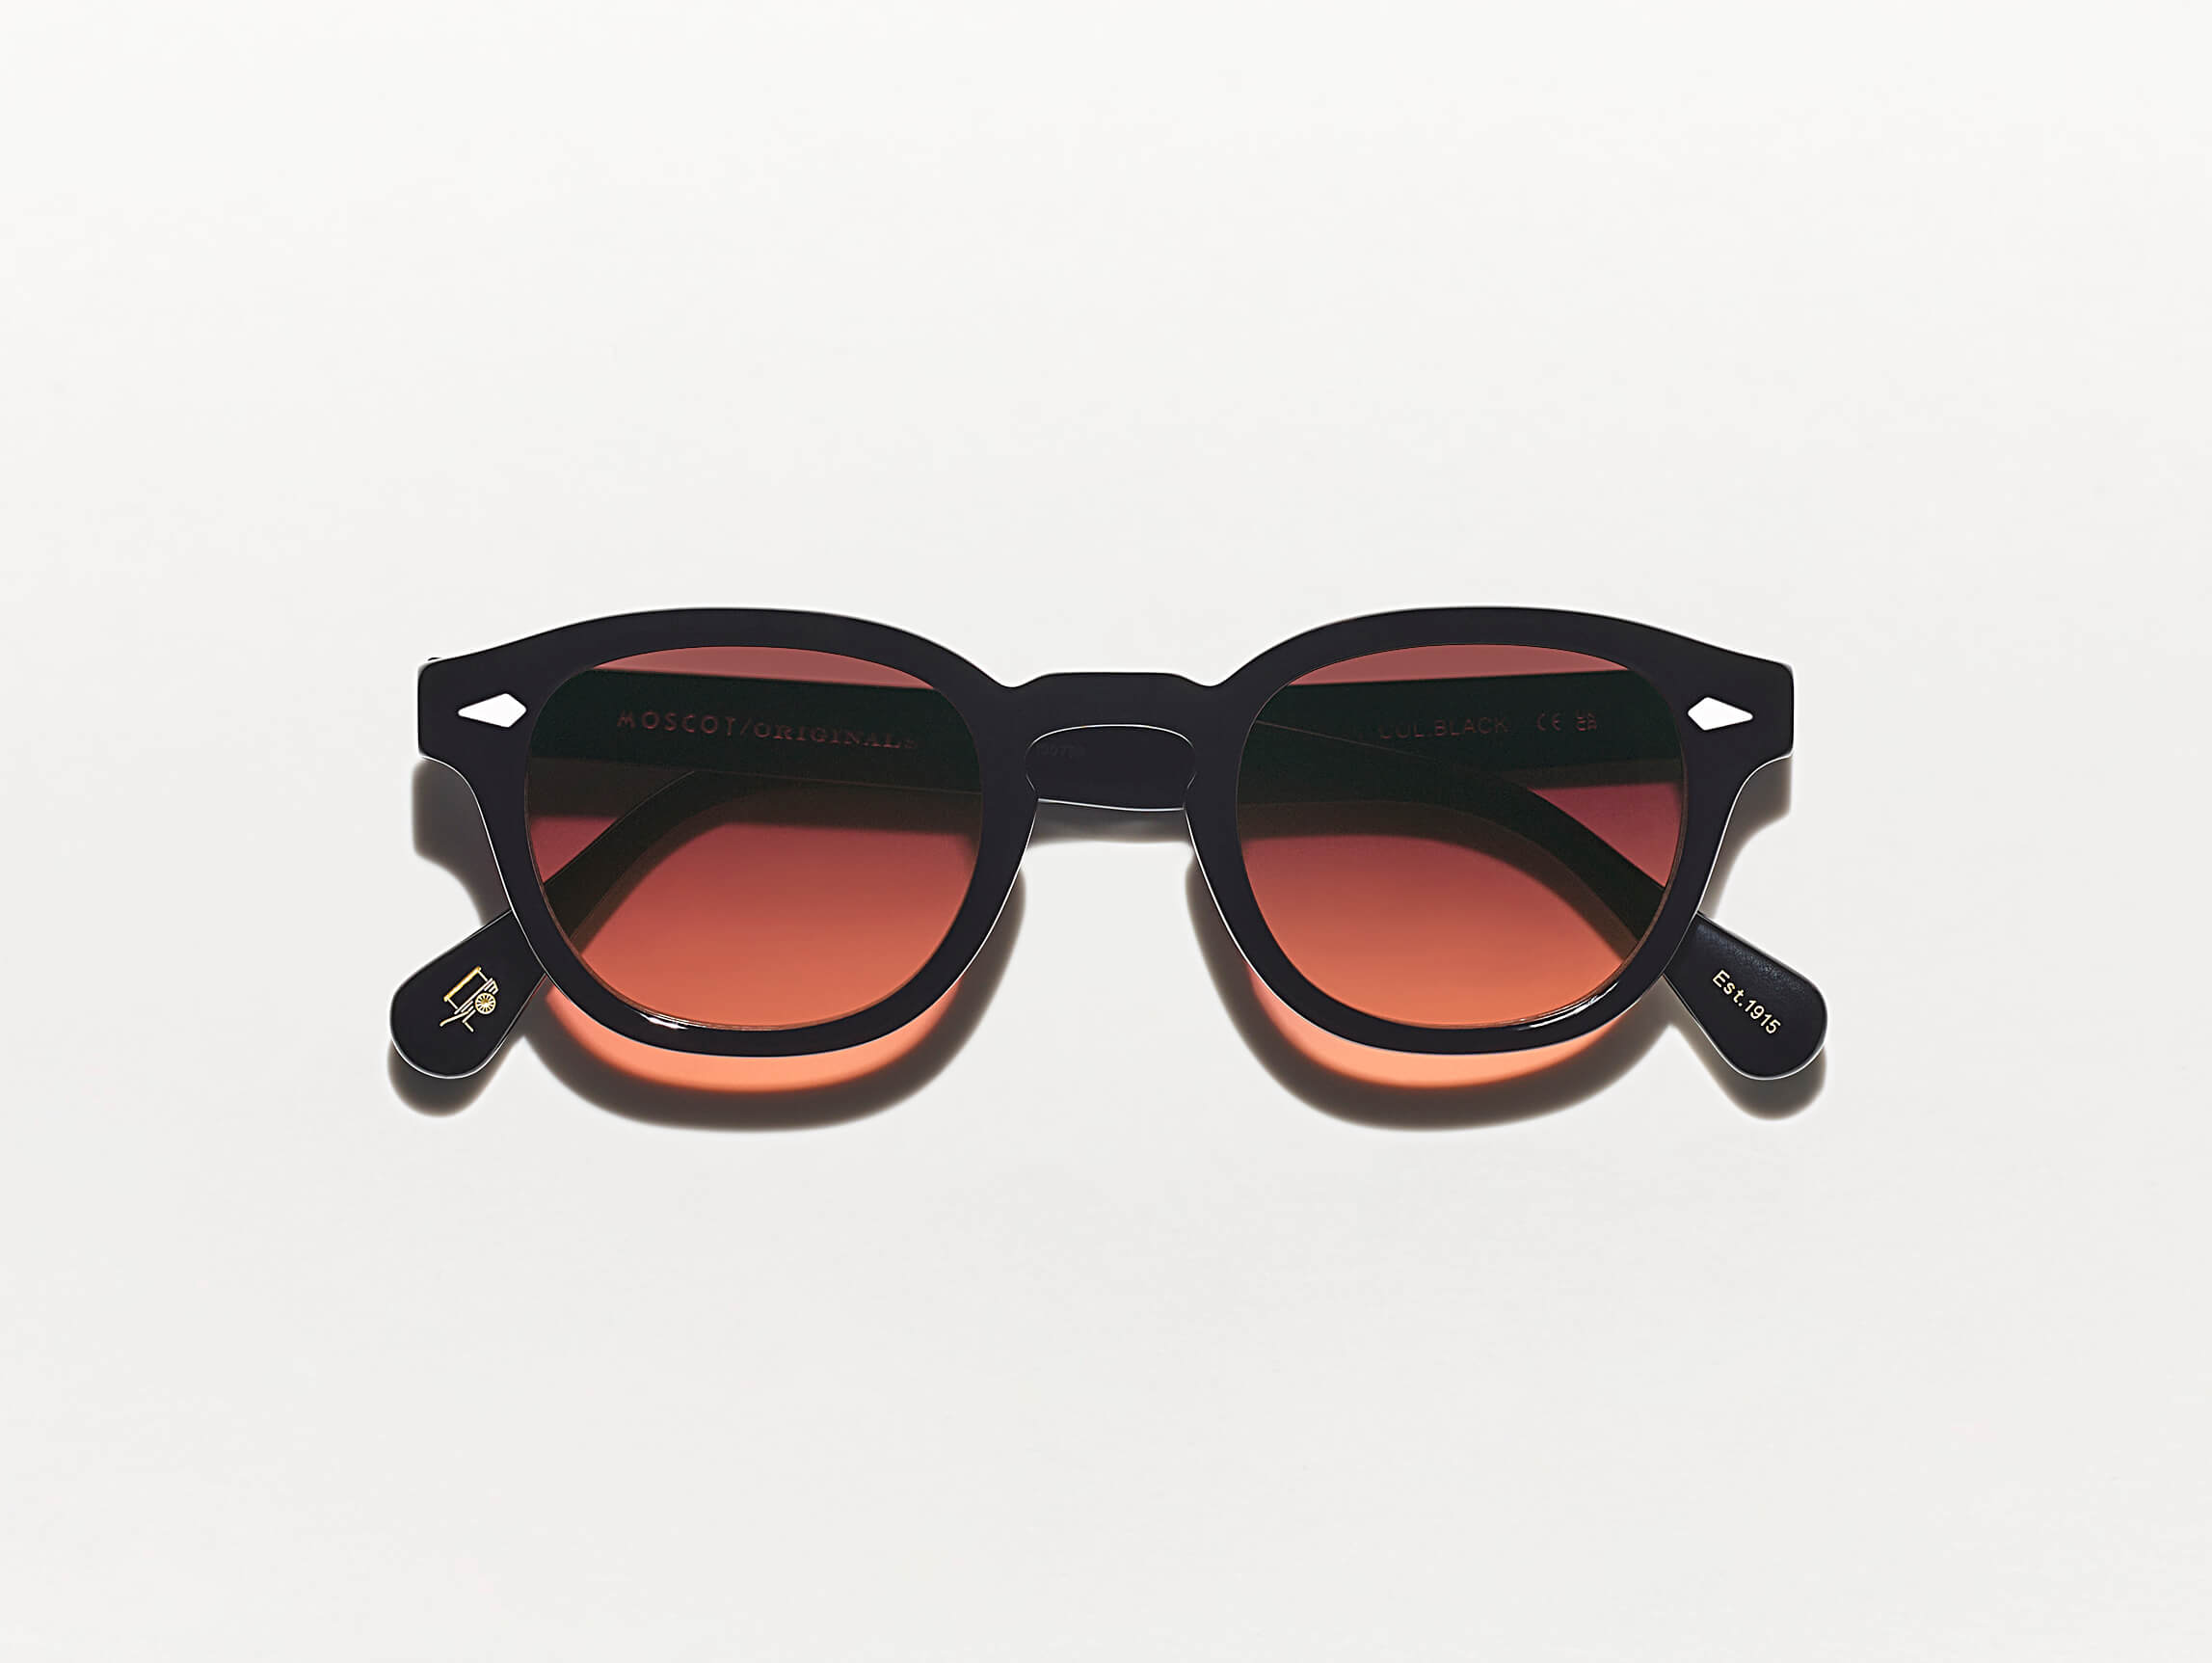 The LEMTOSH Black with Cabernet Tinted Lenses